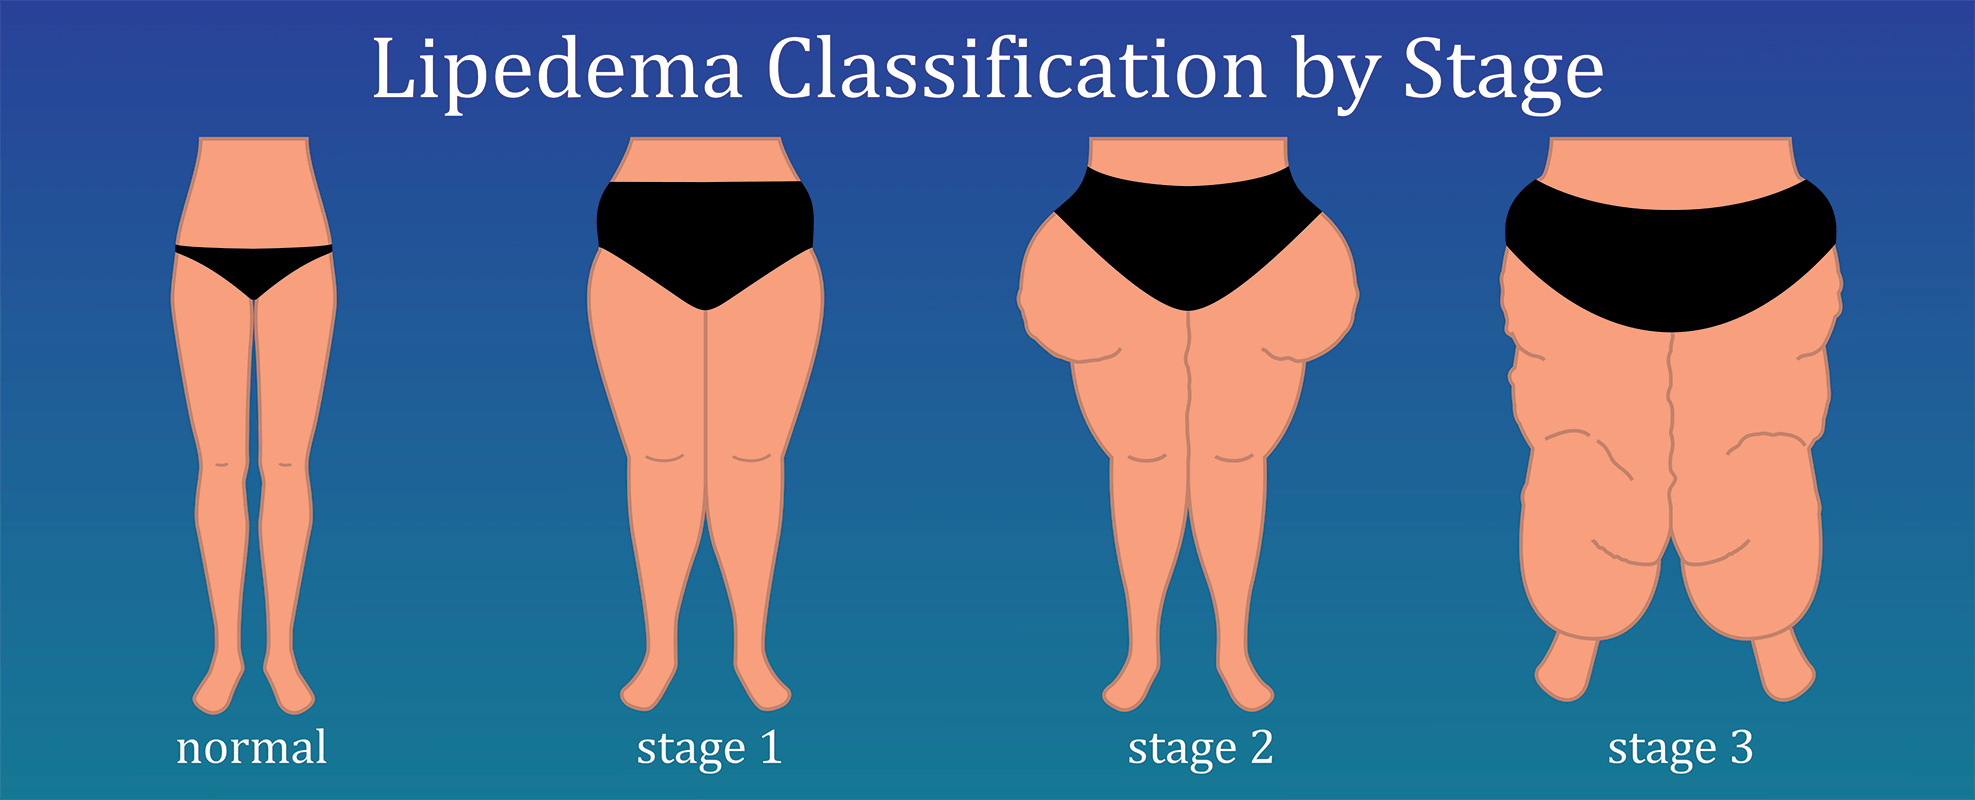 Illustration of lipedema classifications by stage, including normal, stage 1, stage 2, and stage 3.